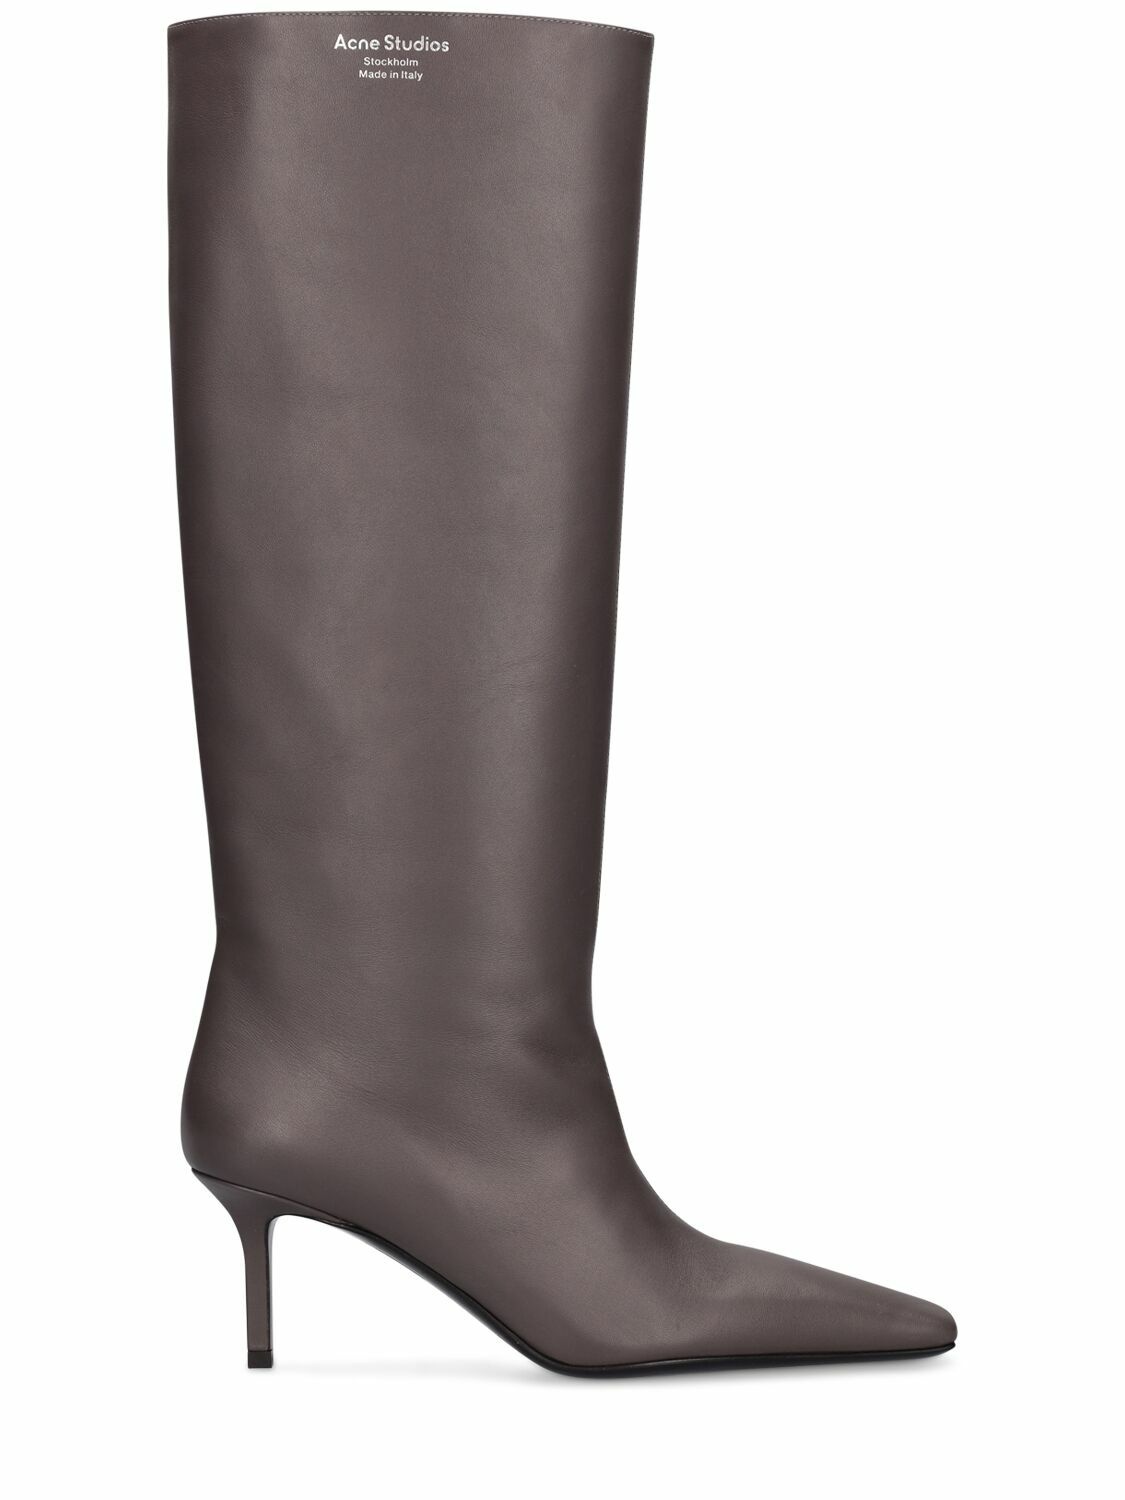 Photo: ACNE STUDIOS - 70mm Leather Tall Boots